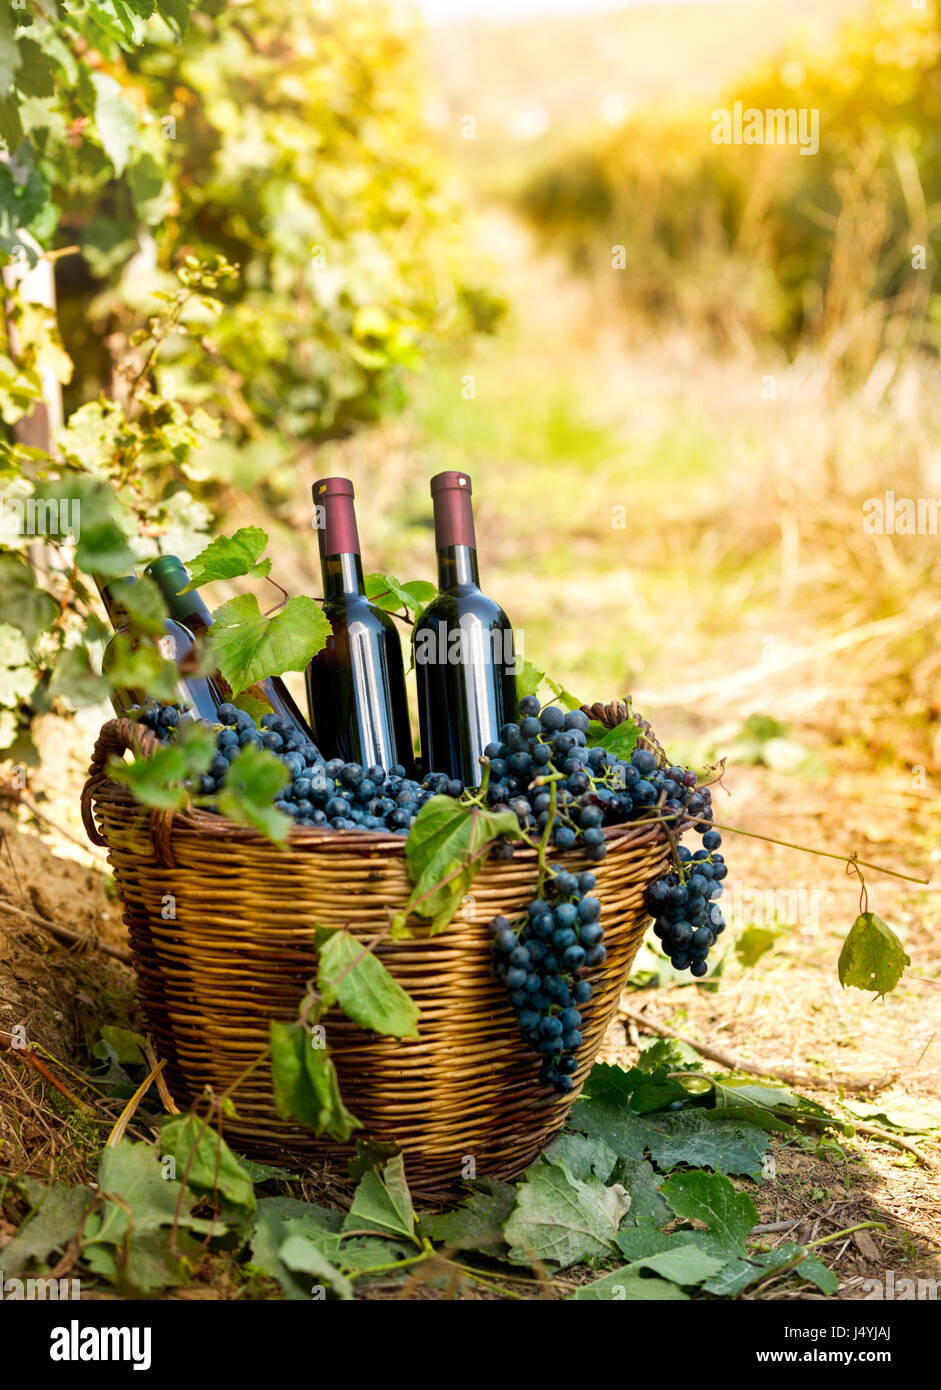 Bottles of red wine and grapes in wicker basket Stock Photo